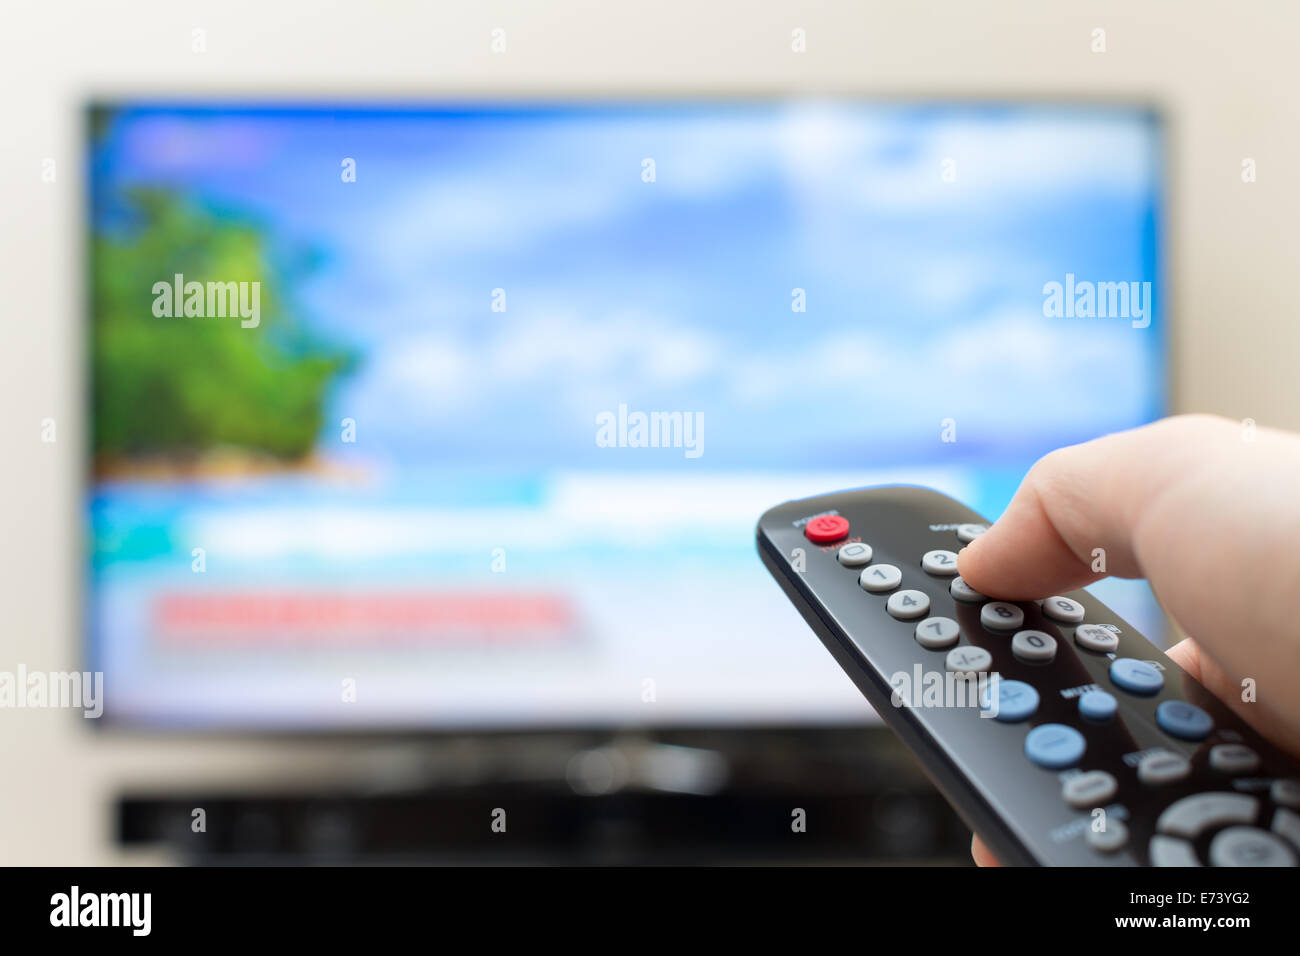 Program switching or button pressing on TV remote control Stock Photo